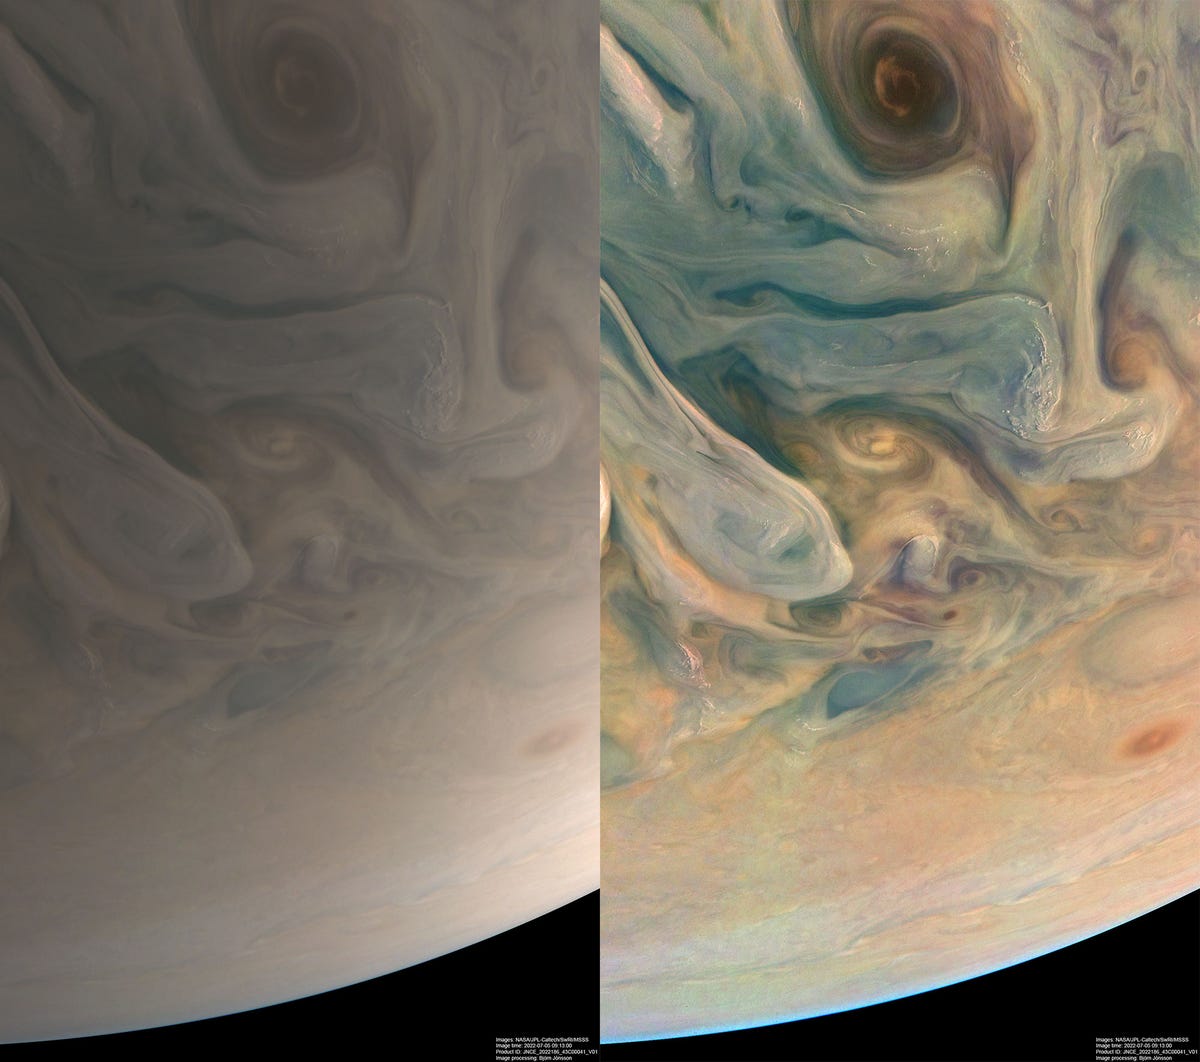 On the left is a slim beige version of Jupiter. On the right is the same image, except for the blue, orange and yellow tones.